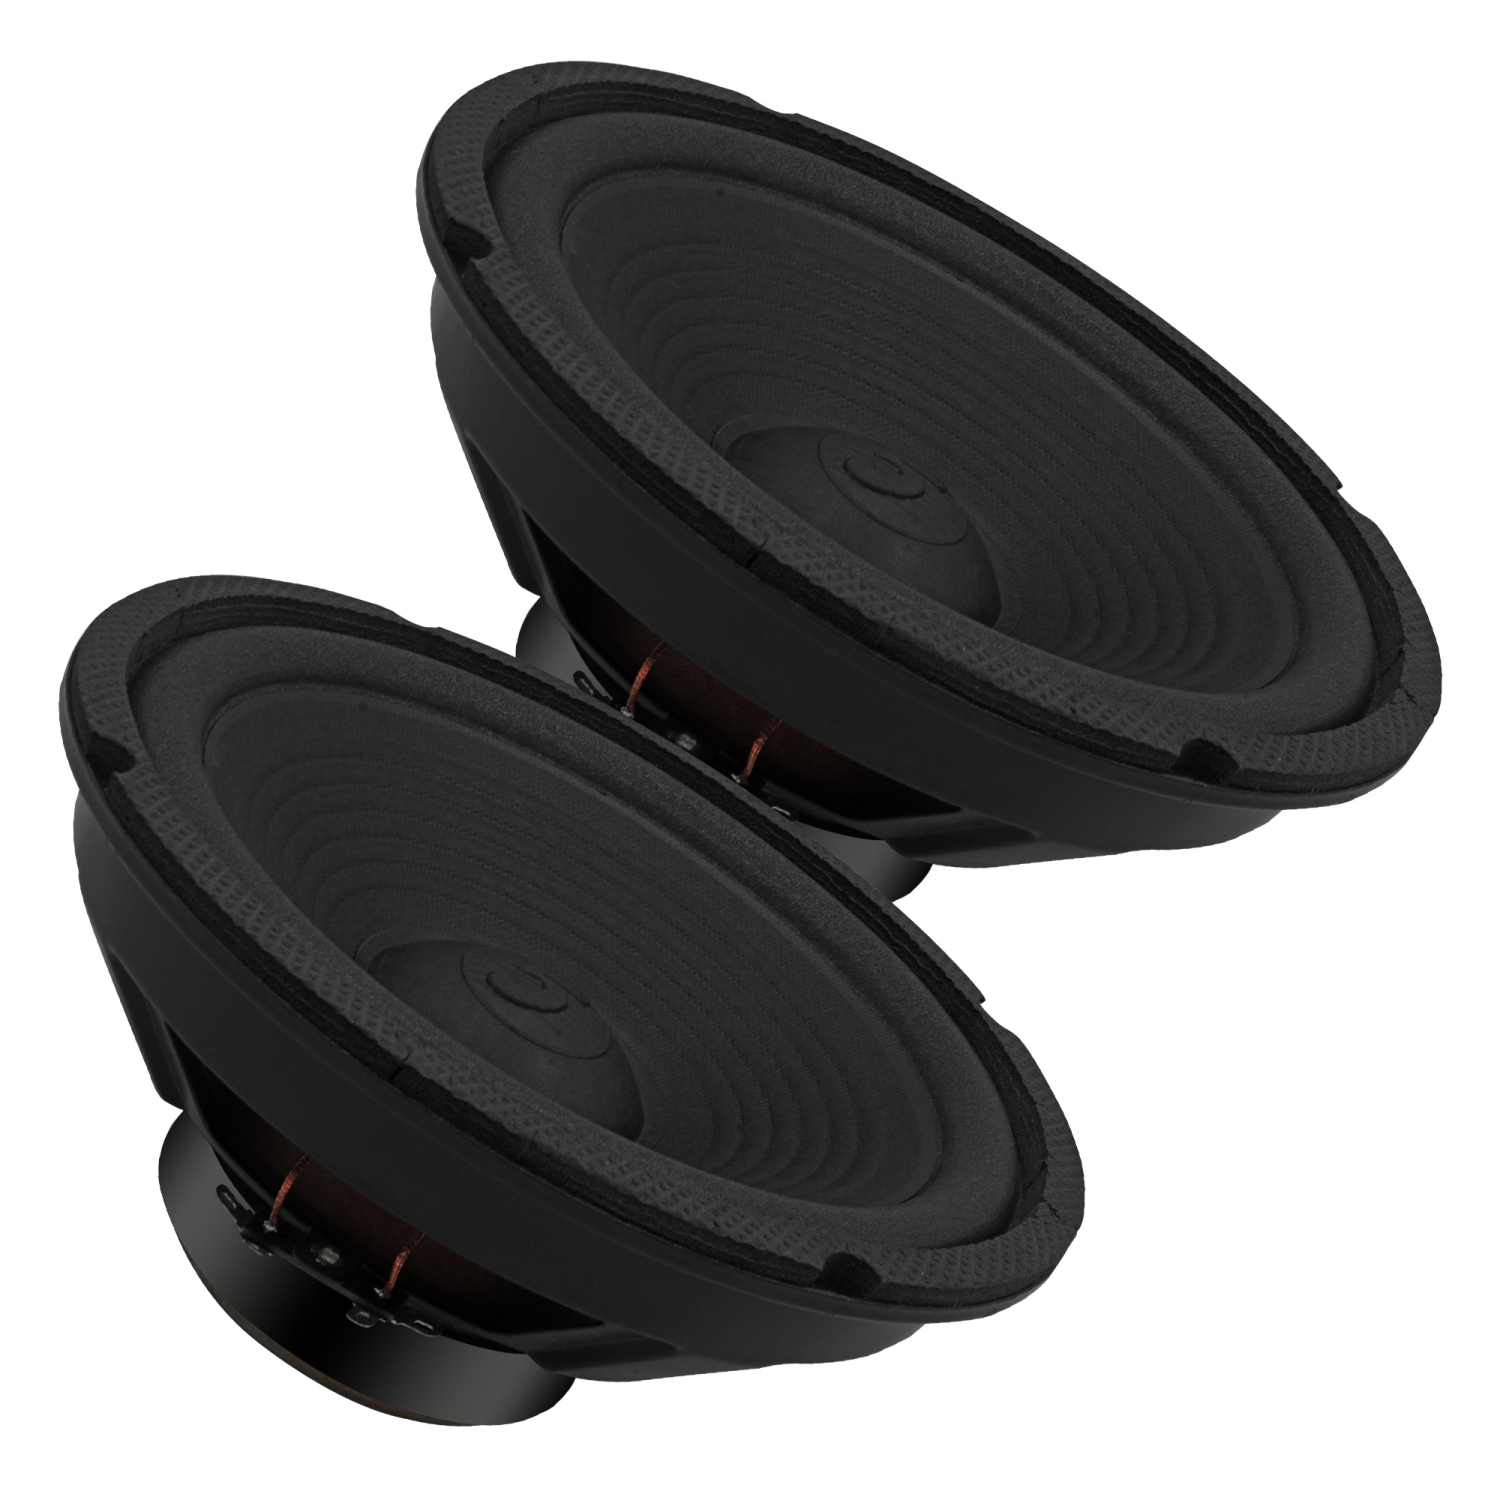 5 Core 8 Inch Subwoofer 2Pack • 500W PMPO 4 Ohm Car Bass Sub Woofer • Replacement Speaker w 0.81" Voice Coil • Bocinas Para Carro- WF 8"-890 2 PC